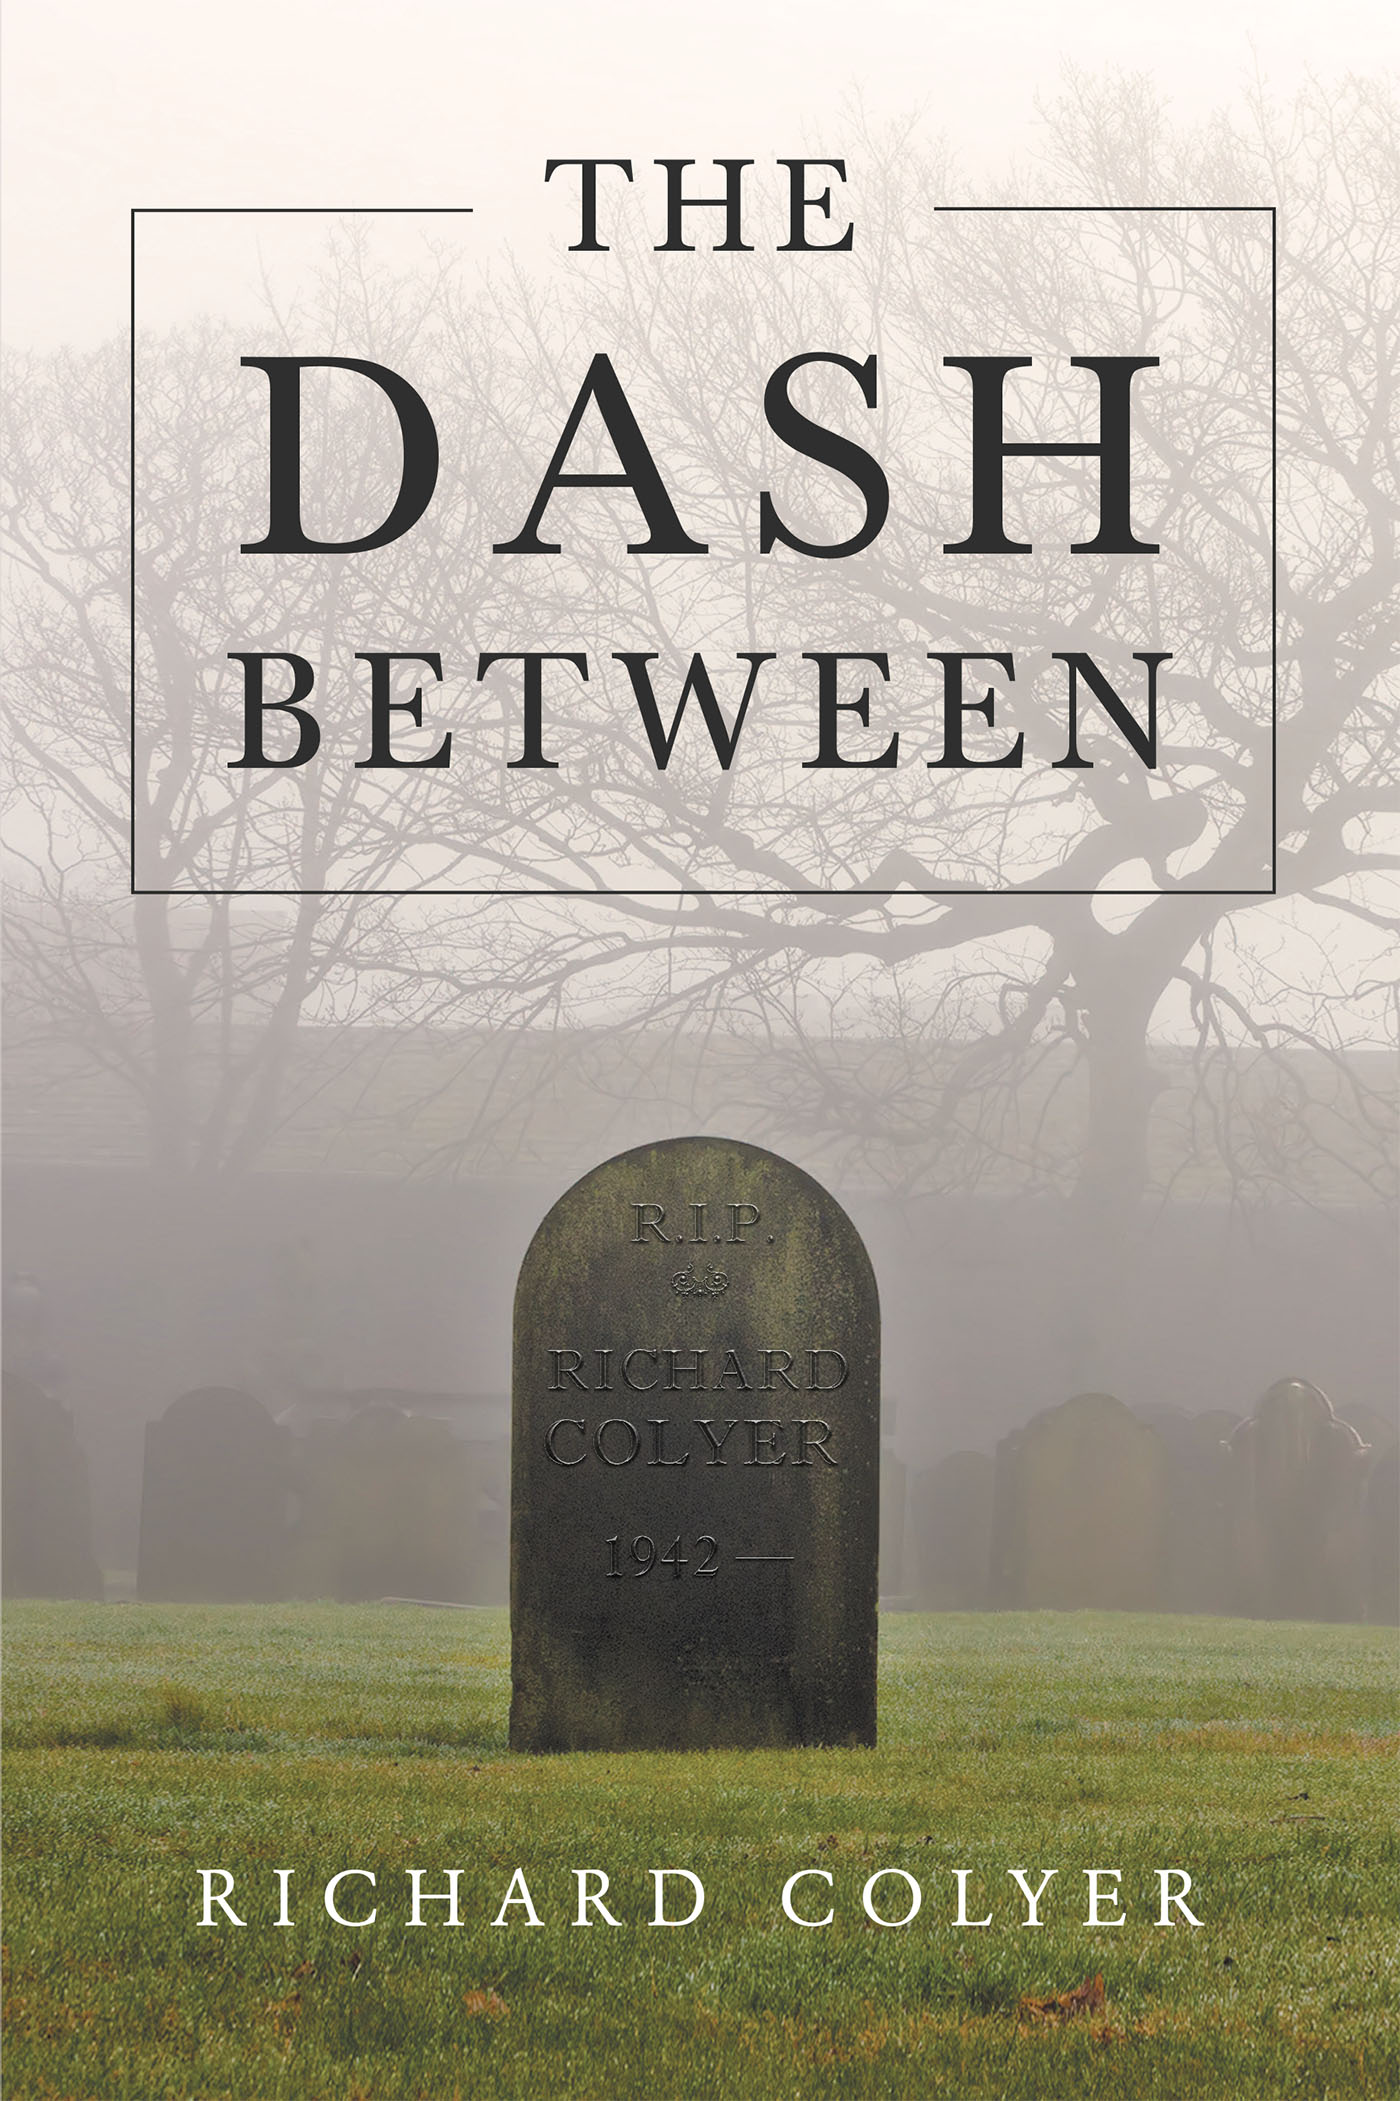 Author Richard Colyer’s New Book “The Dash Between” Is a Collection of